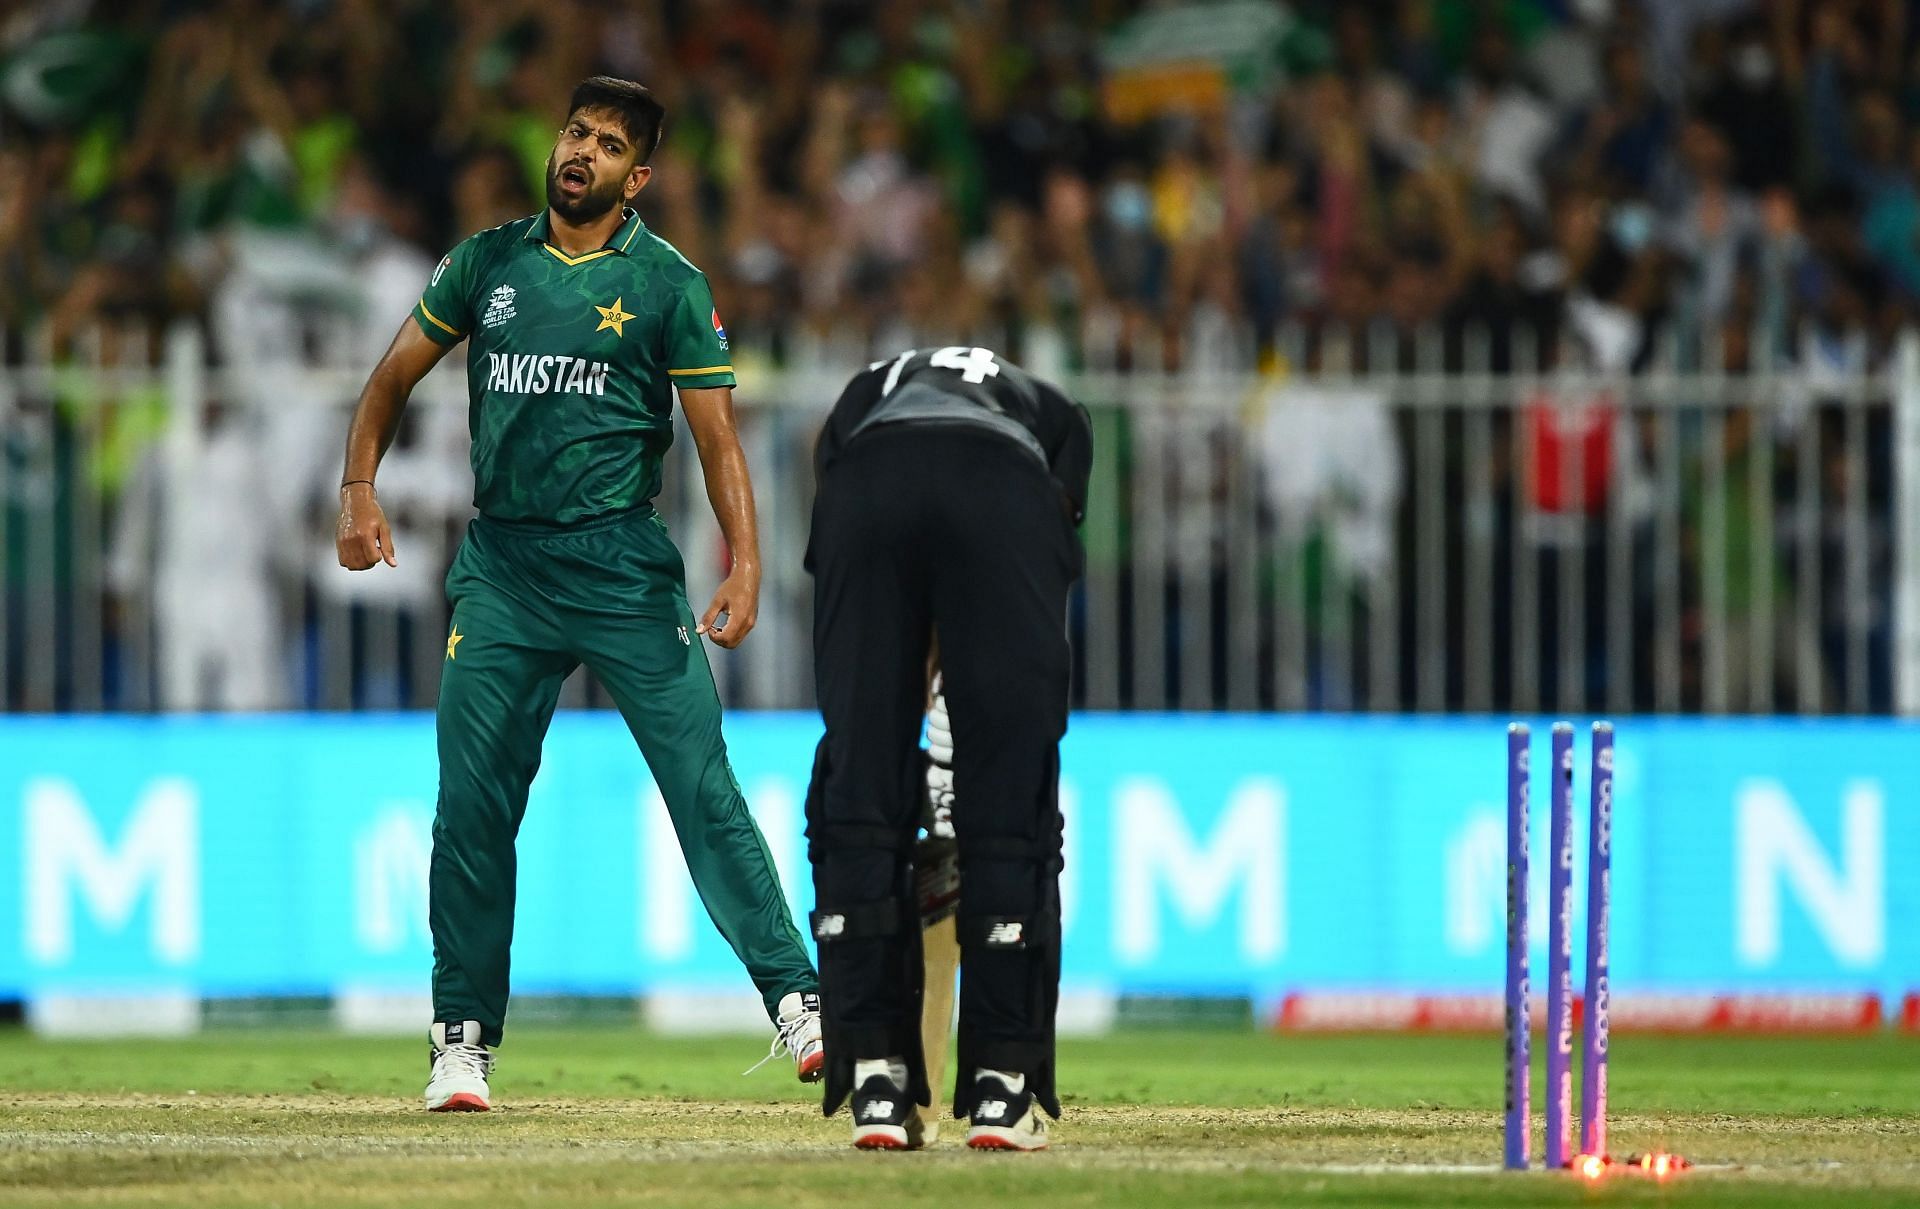 Imad Wasim is expected to play an important role for his team.